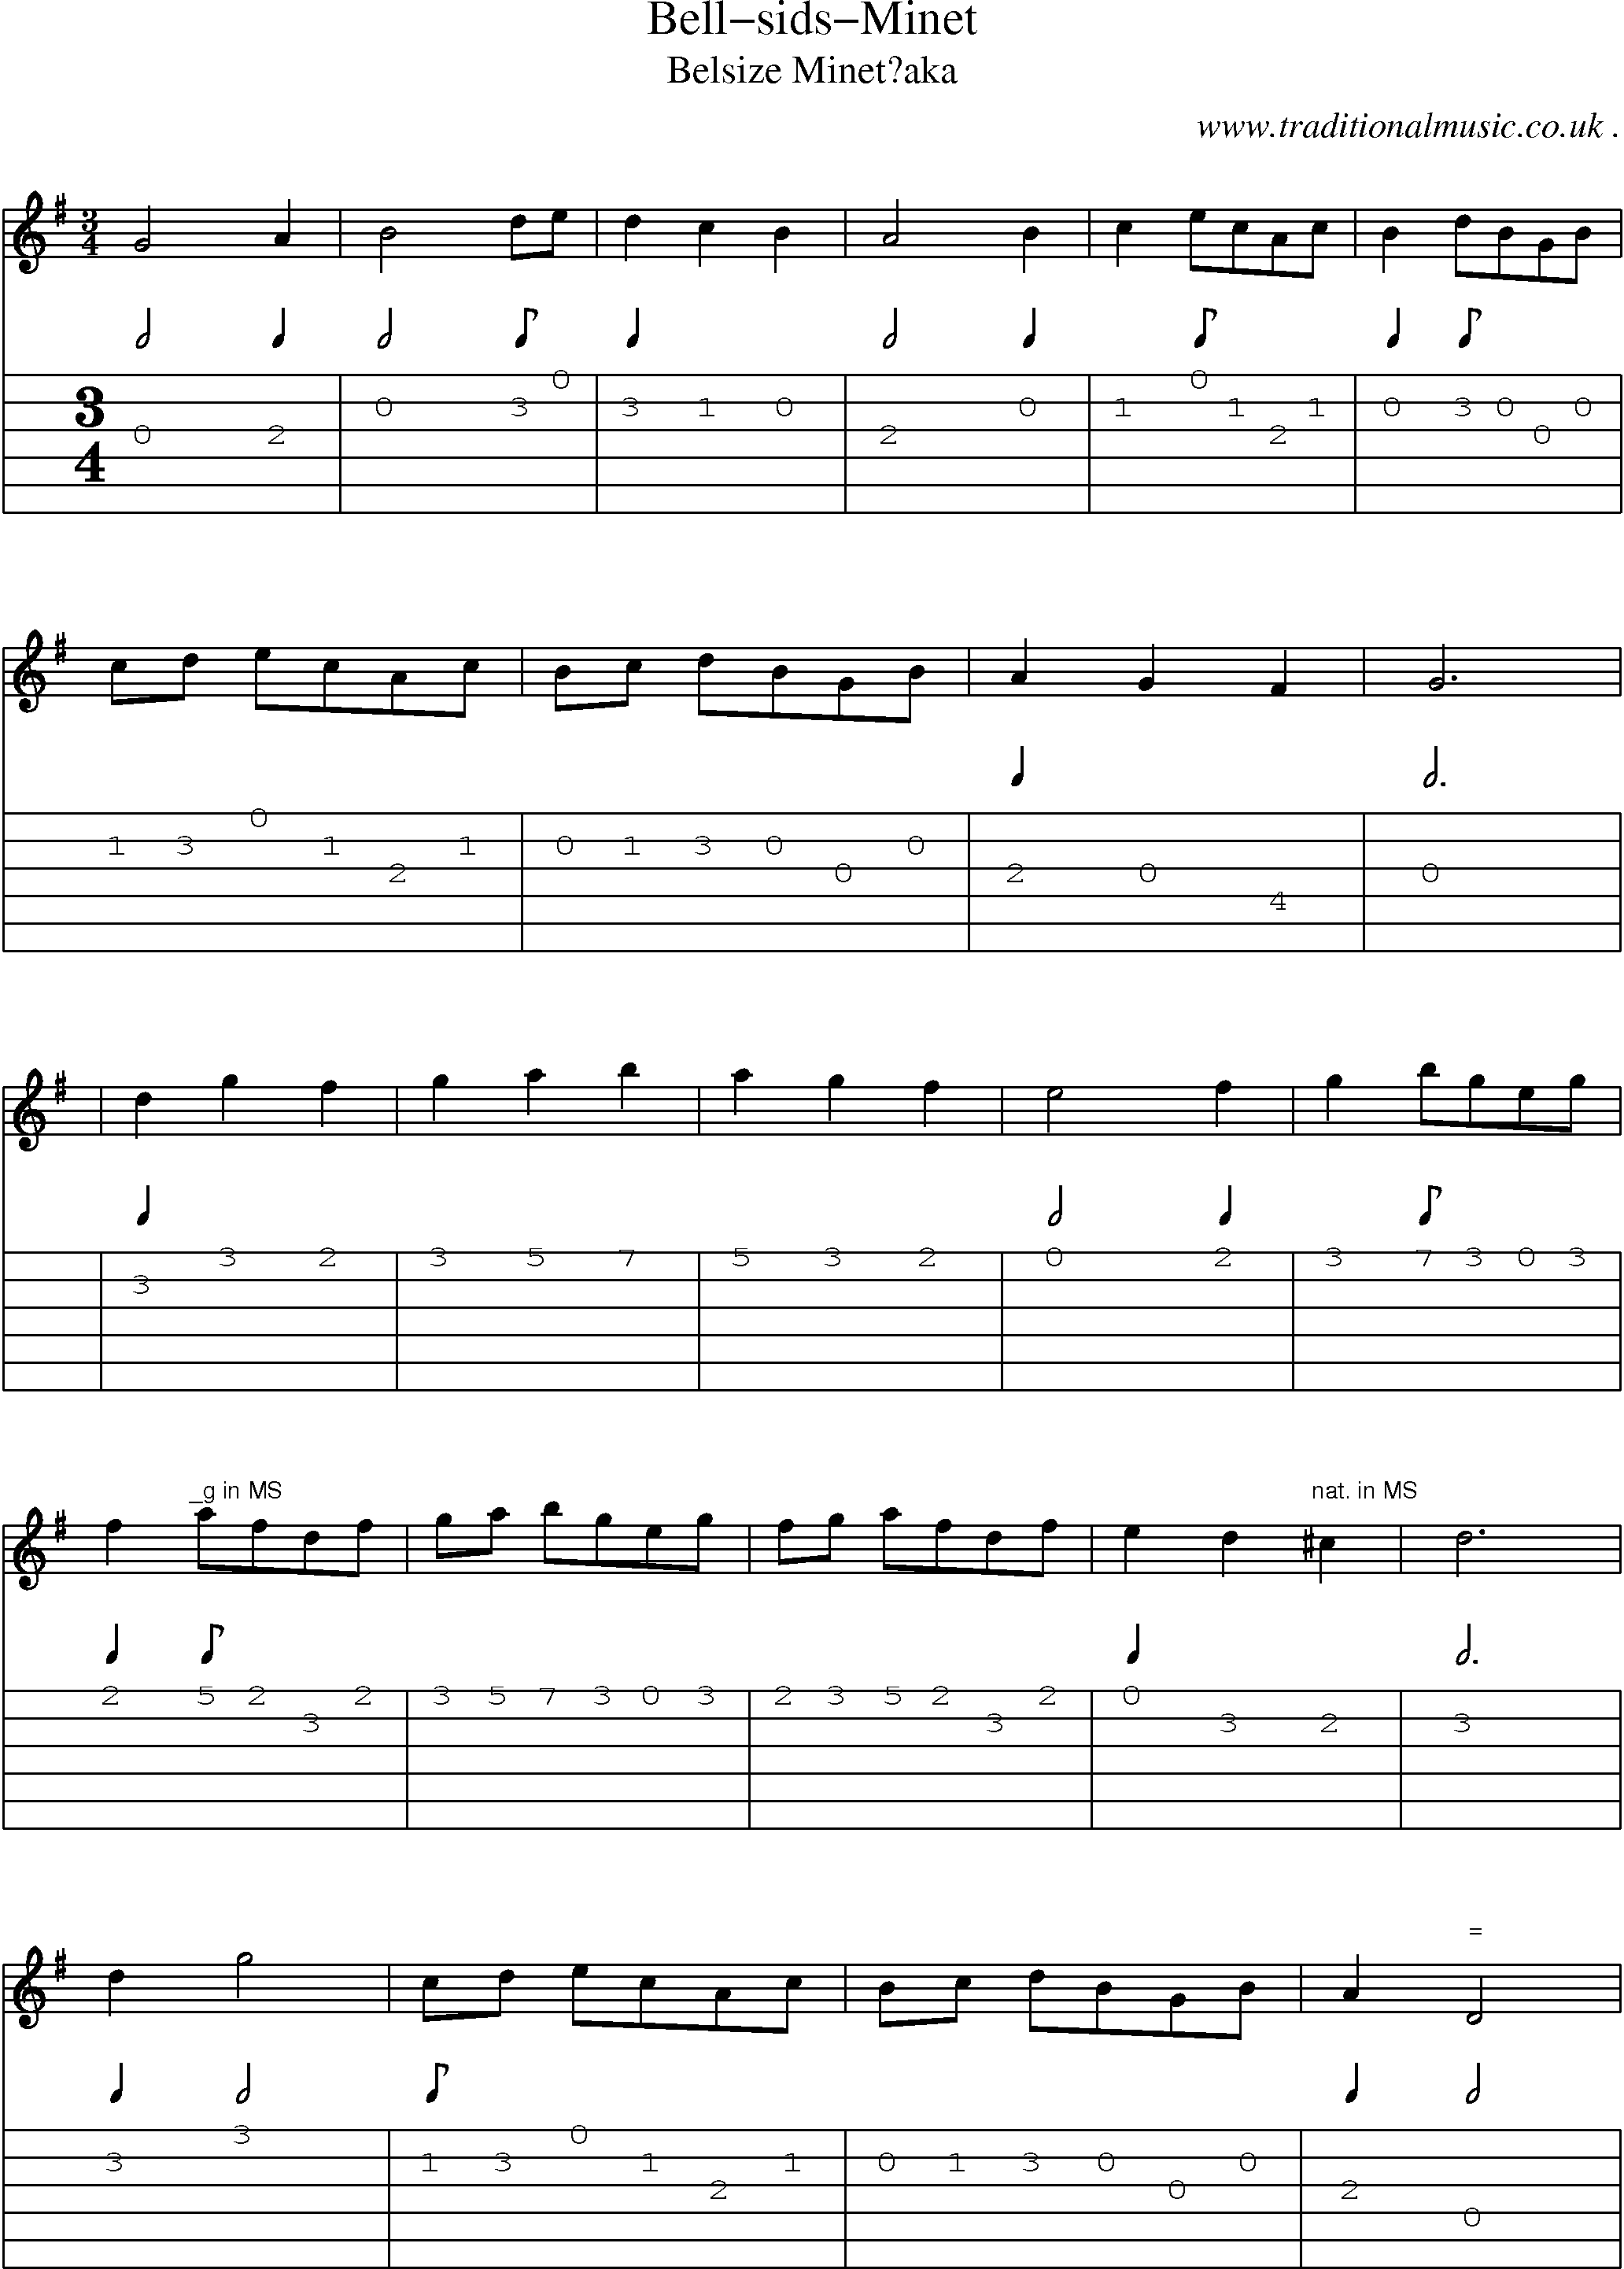 Sheet-Music and Guitar Tabs for Bell-sids-minet